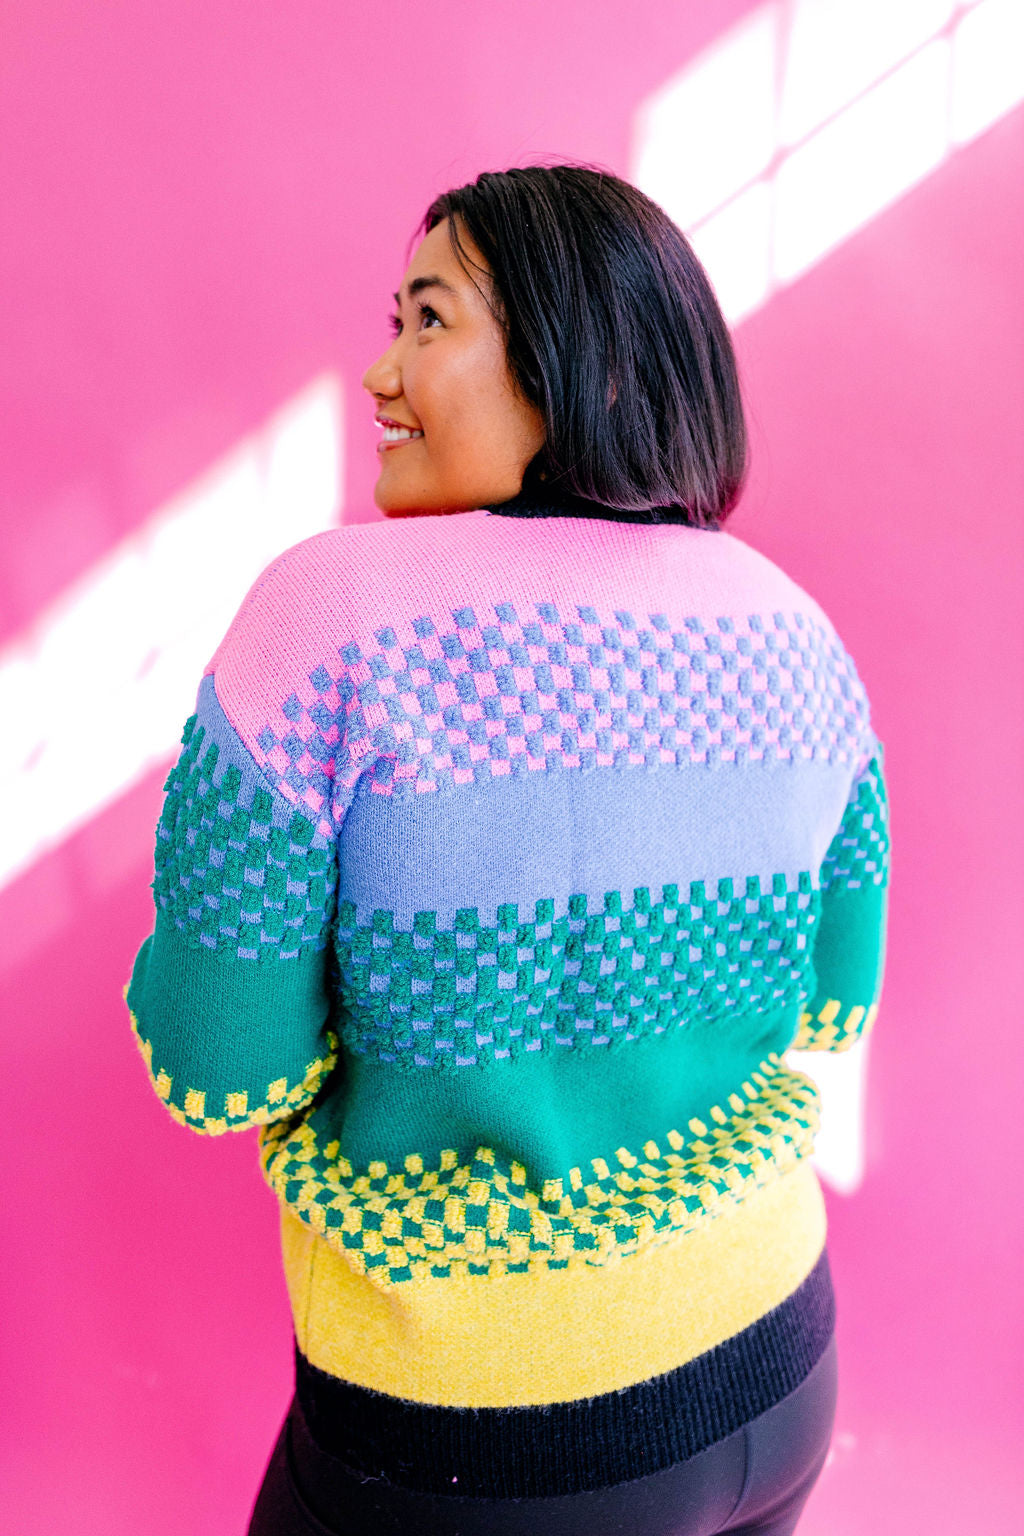 Strong Female Ombré Sweater